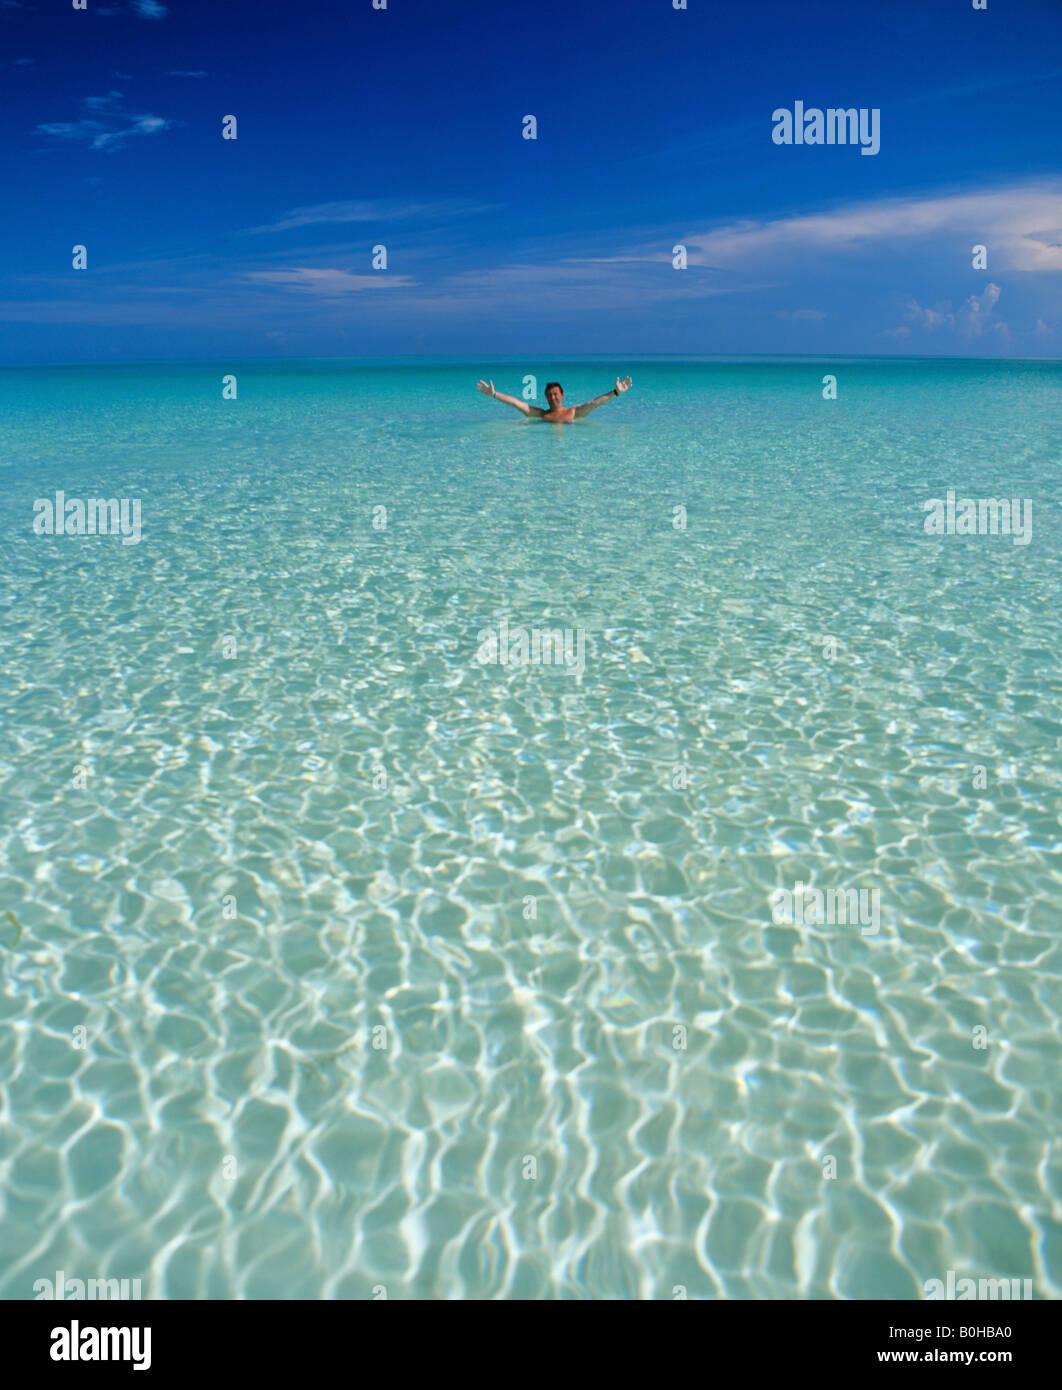 Crystal clear ocean water, man standing in shallow water, Maldives, Indian Ocean Stock Photo